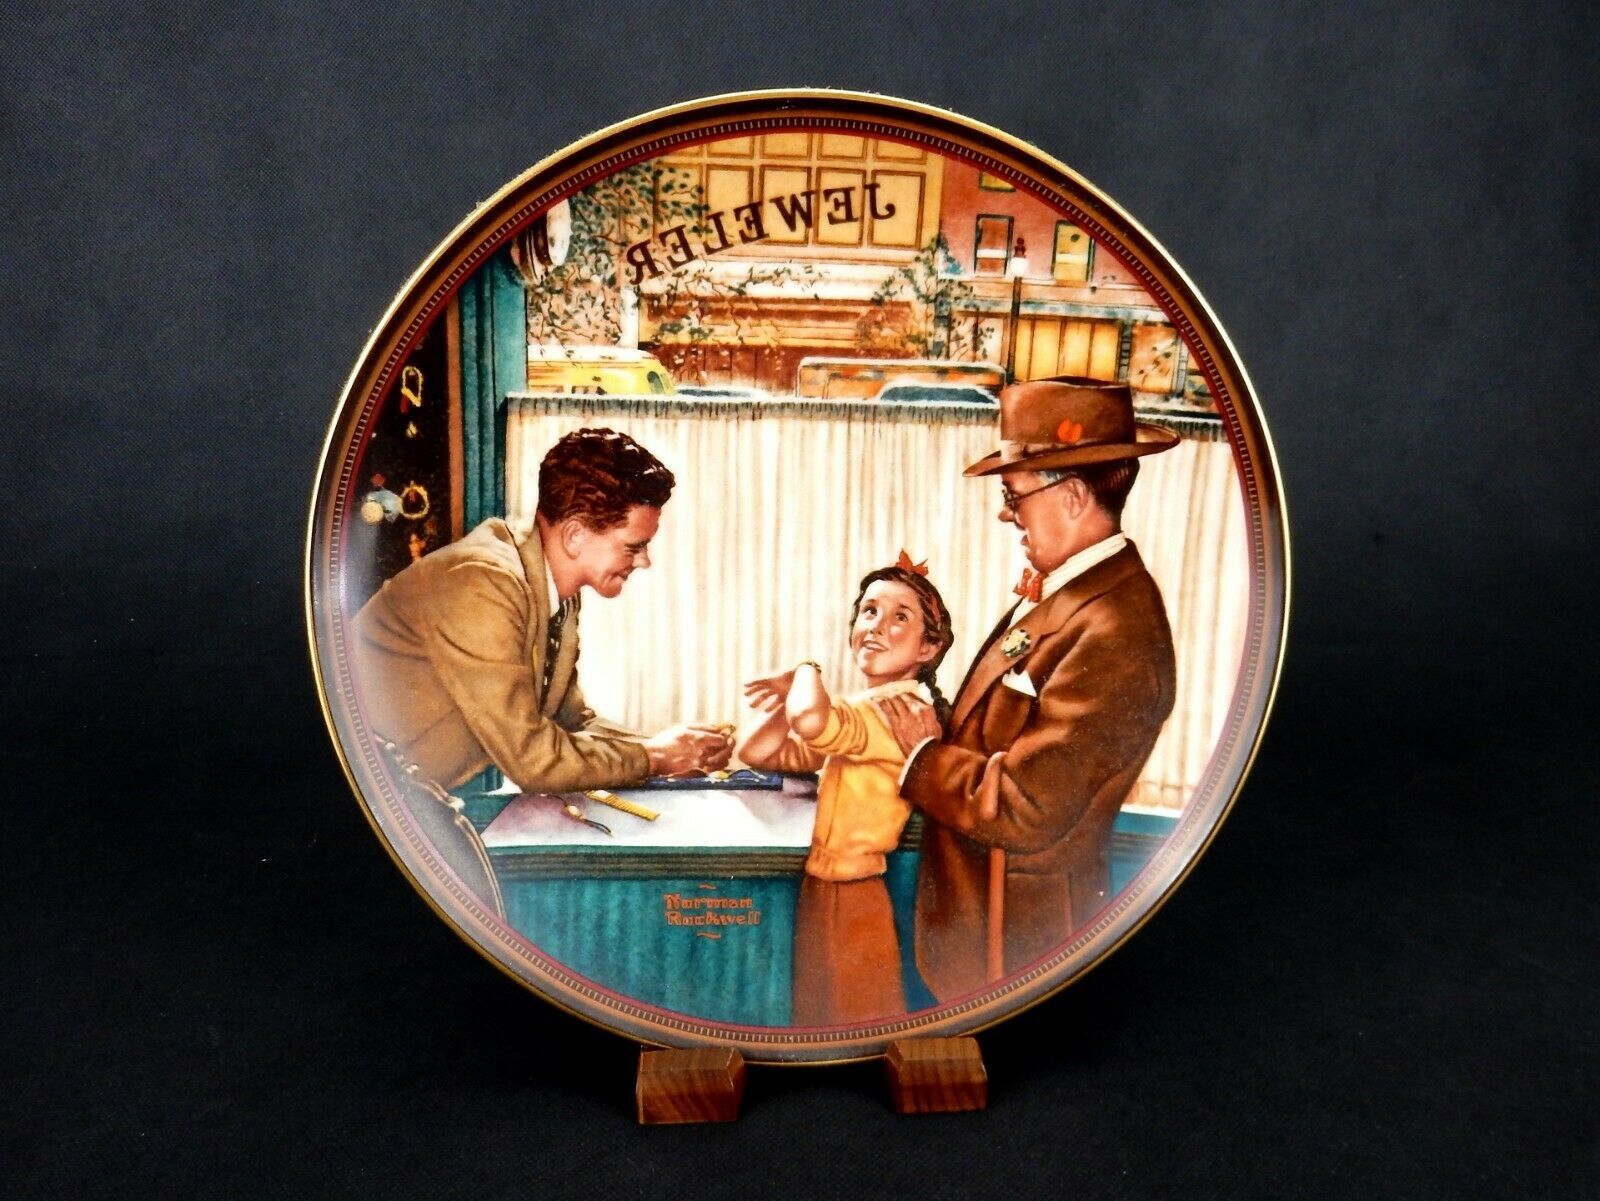 Primary image for Vintage Collector Plate, "A Time To Keep" Rockwell's The Ones We Love, #PLT56B